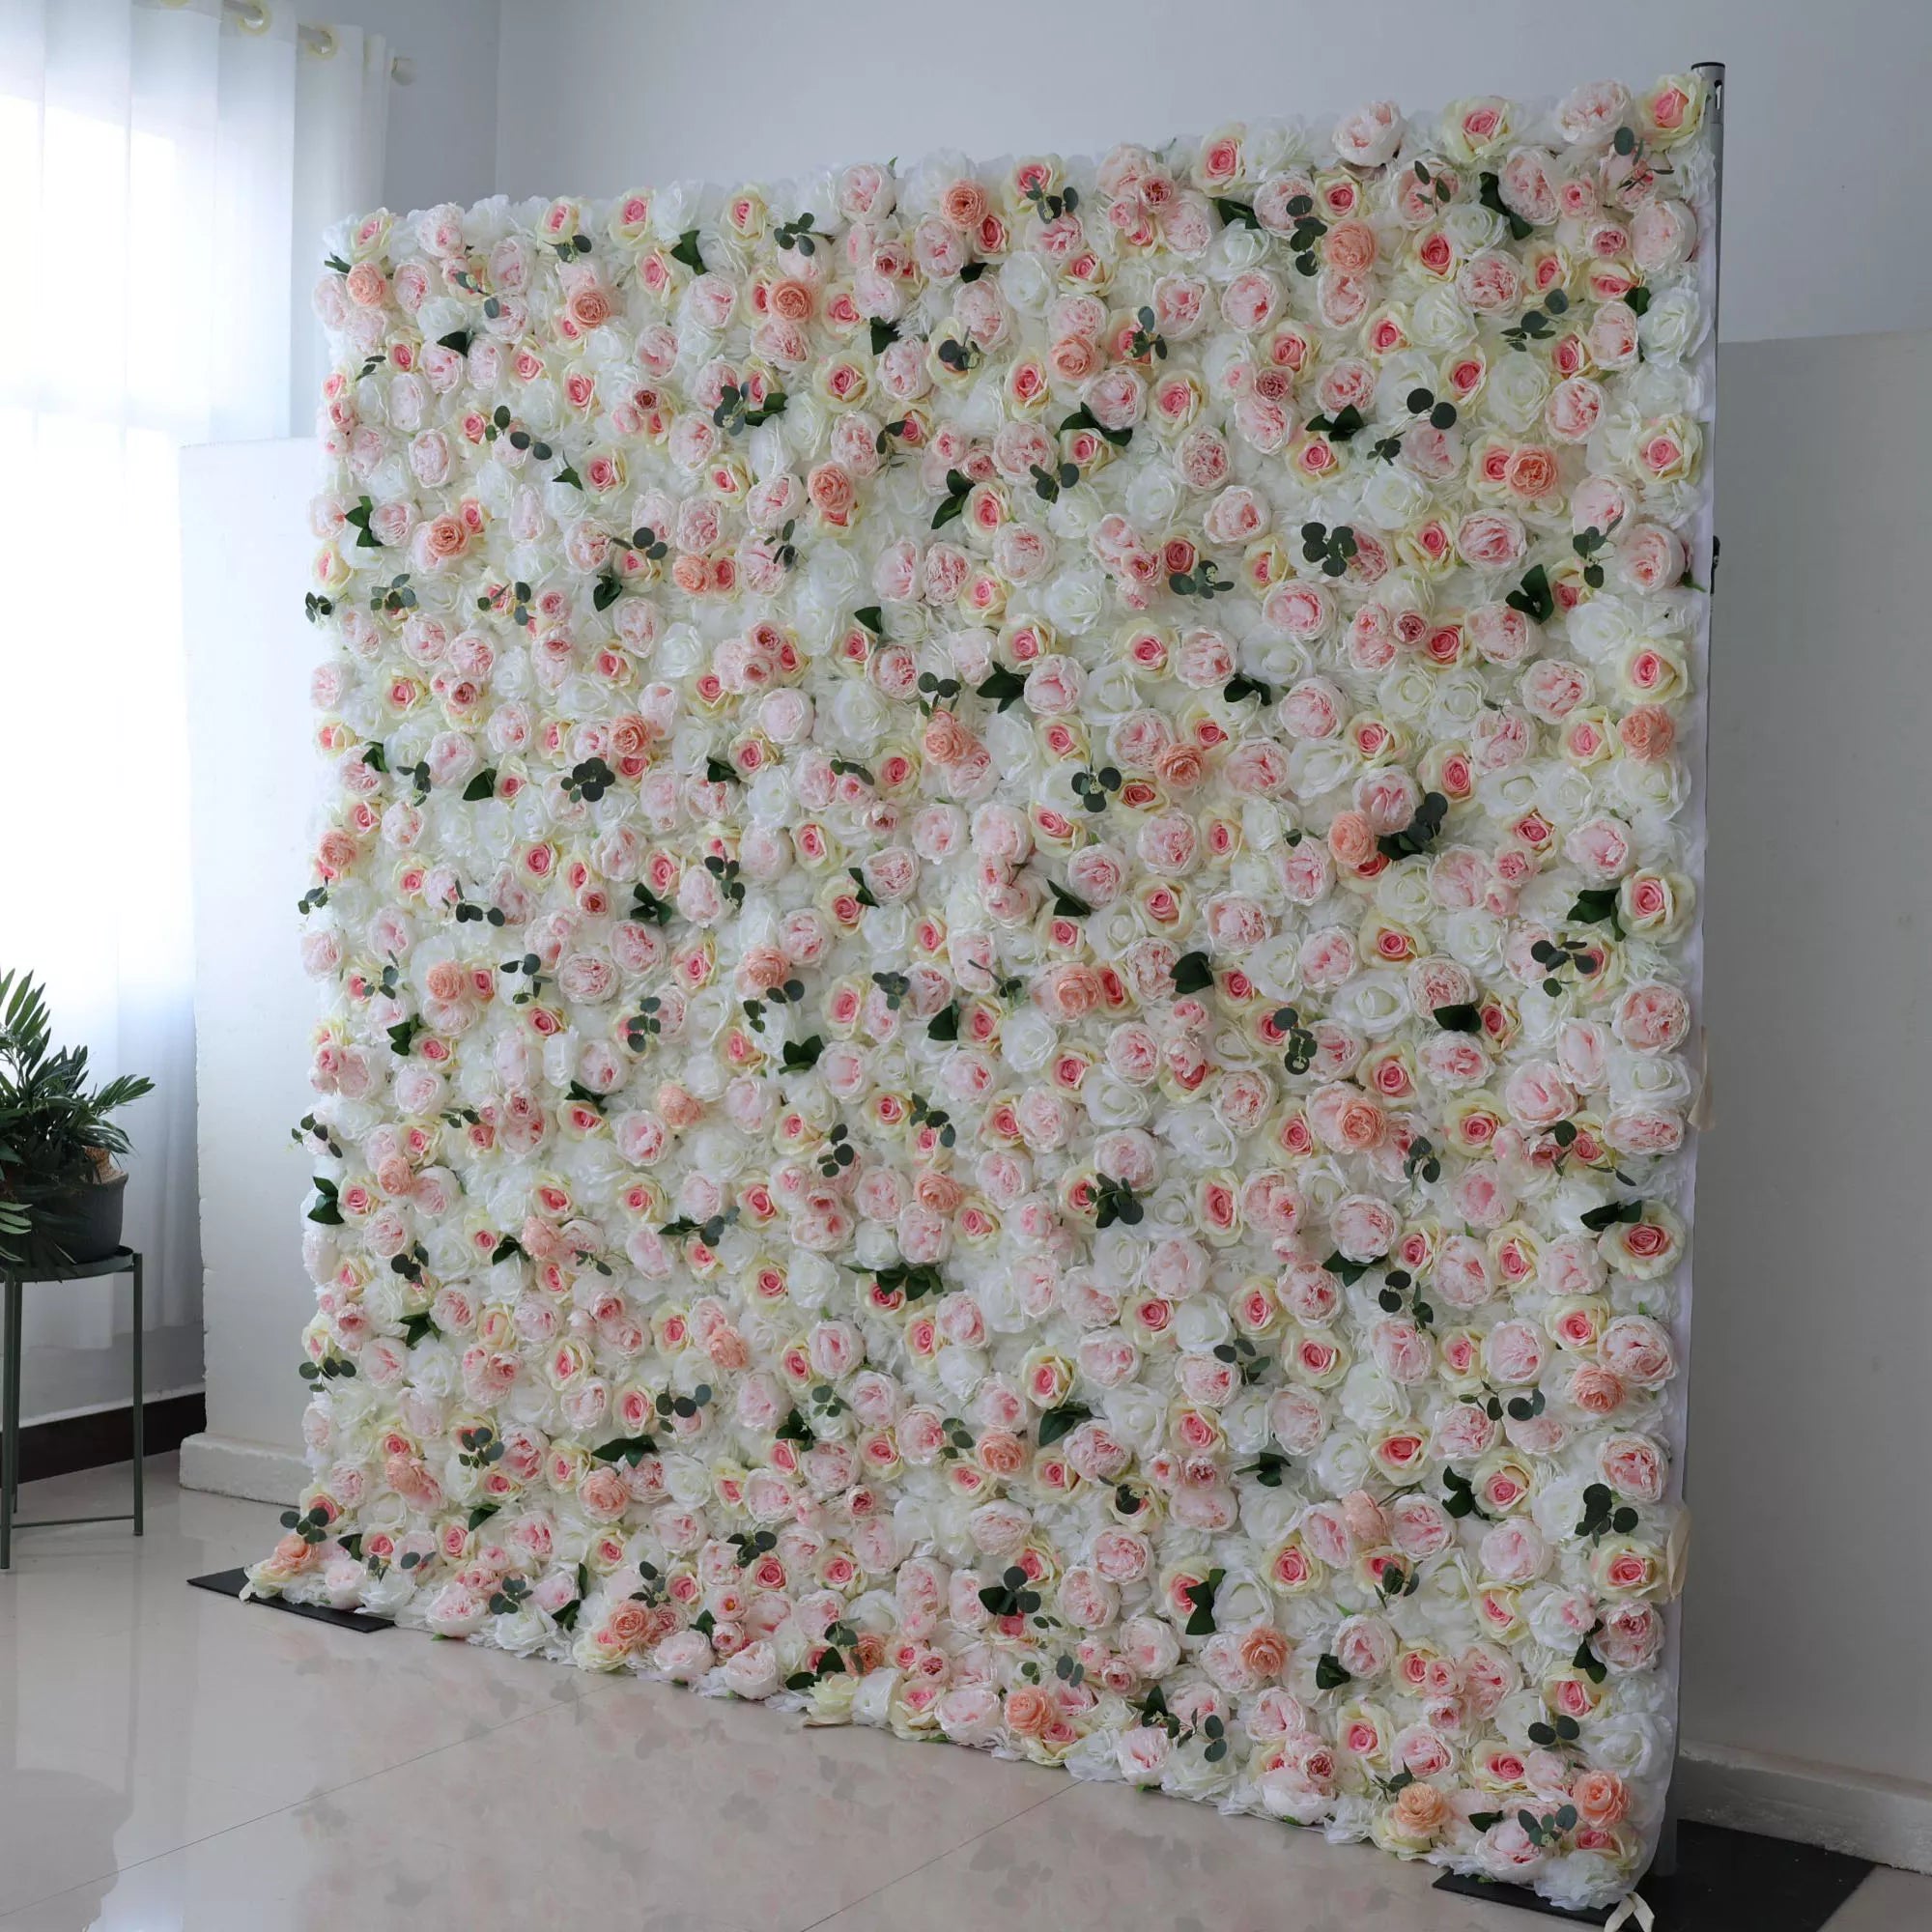 Valar Flowers roll up fabric artificial flower wall for wedding backdrop, floral design VF-1091